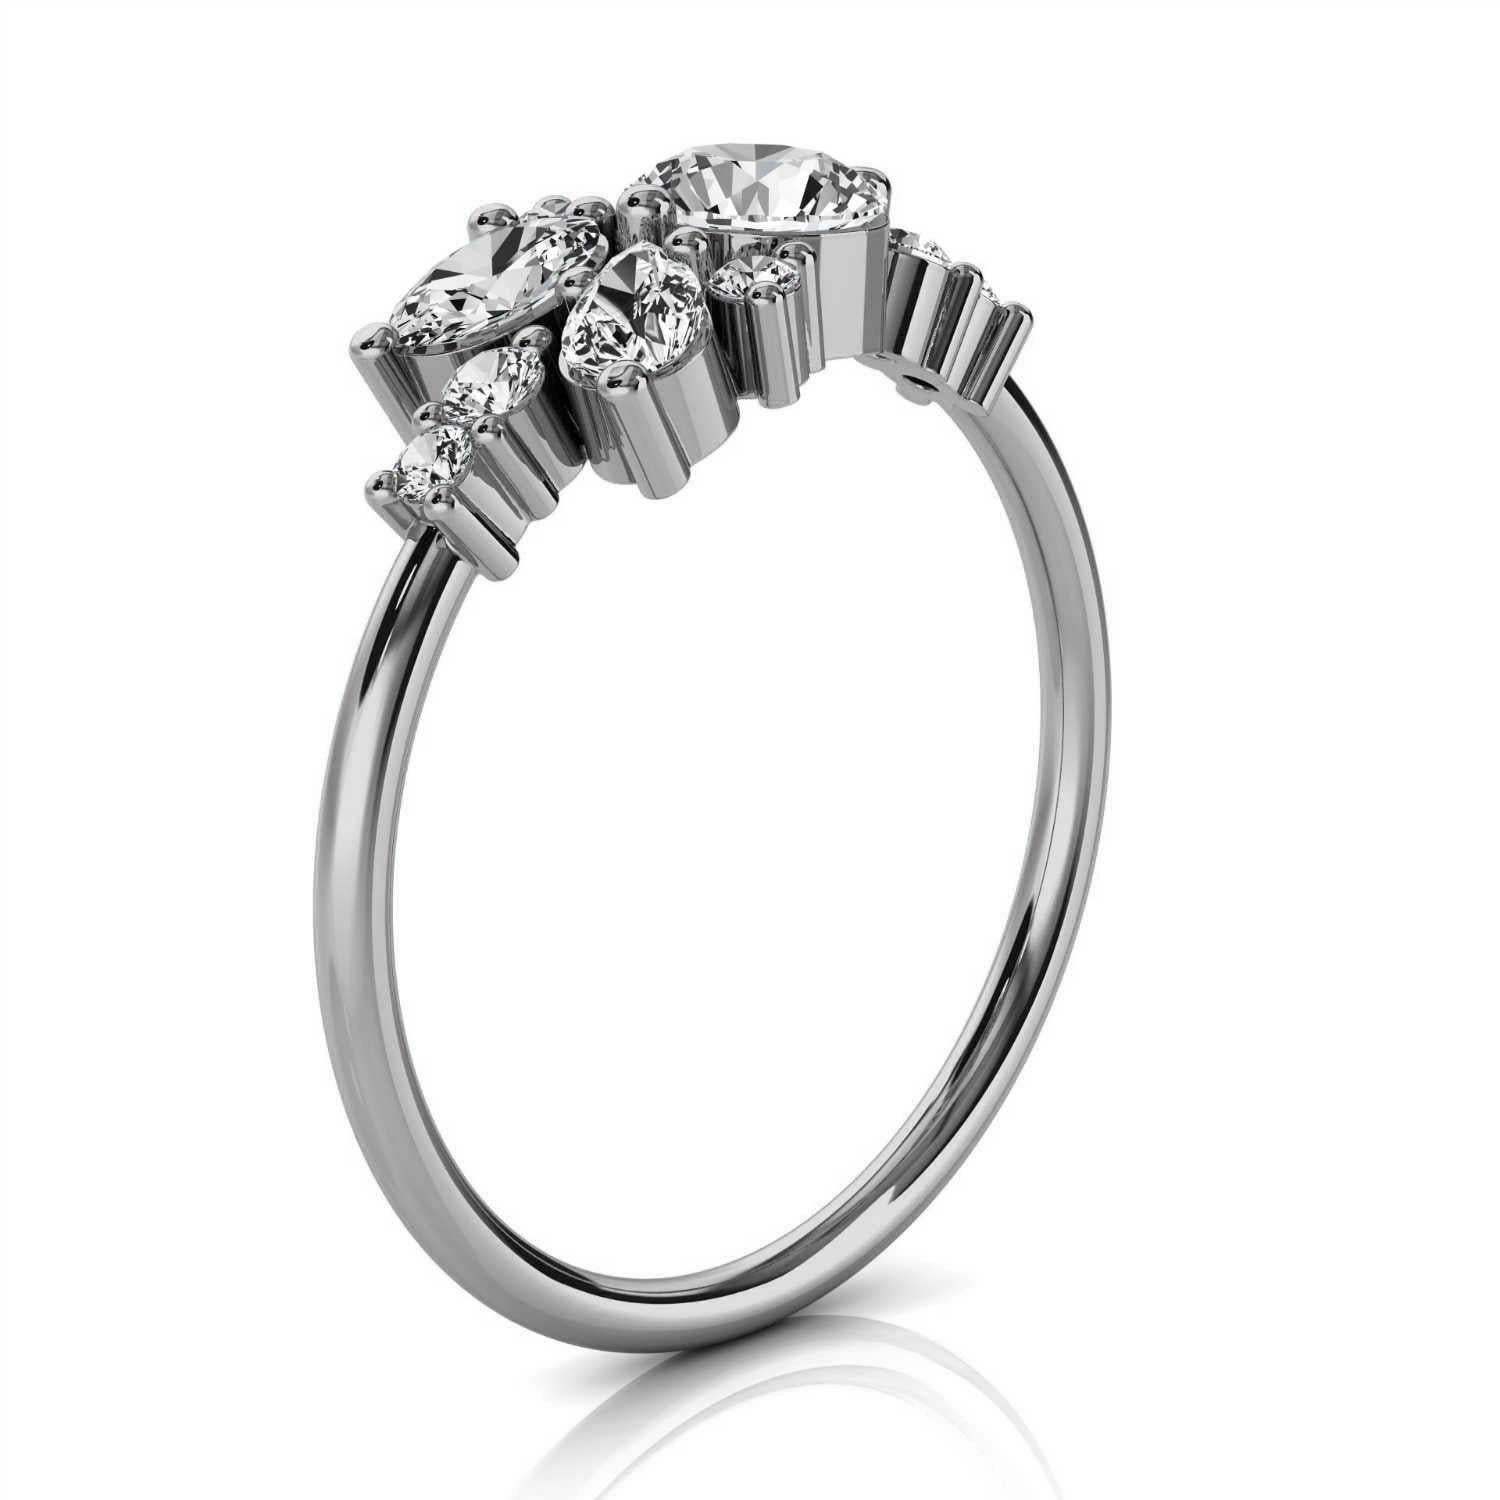 This Delicate ring features nine (9) diamonds scattered on top of a 1.2 mm band. This summer of love of Oval, Pear, and Round shape diamonds creates the ultimate organic ring. It's stackable-Its fun! Experience the difference in person!

Product